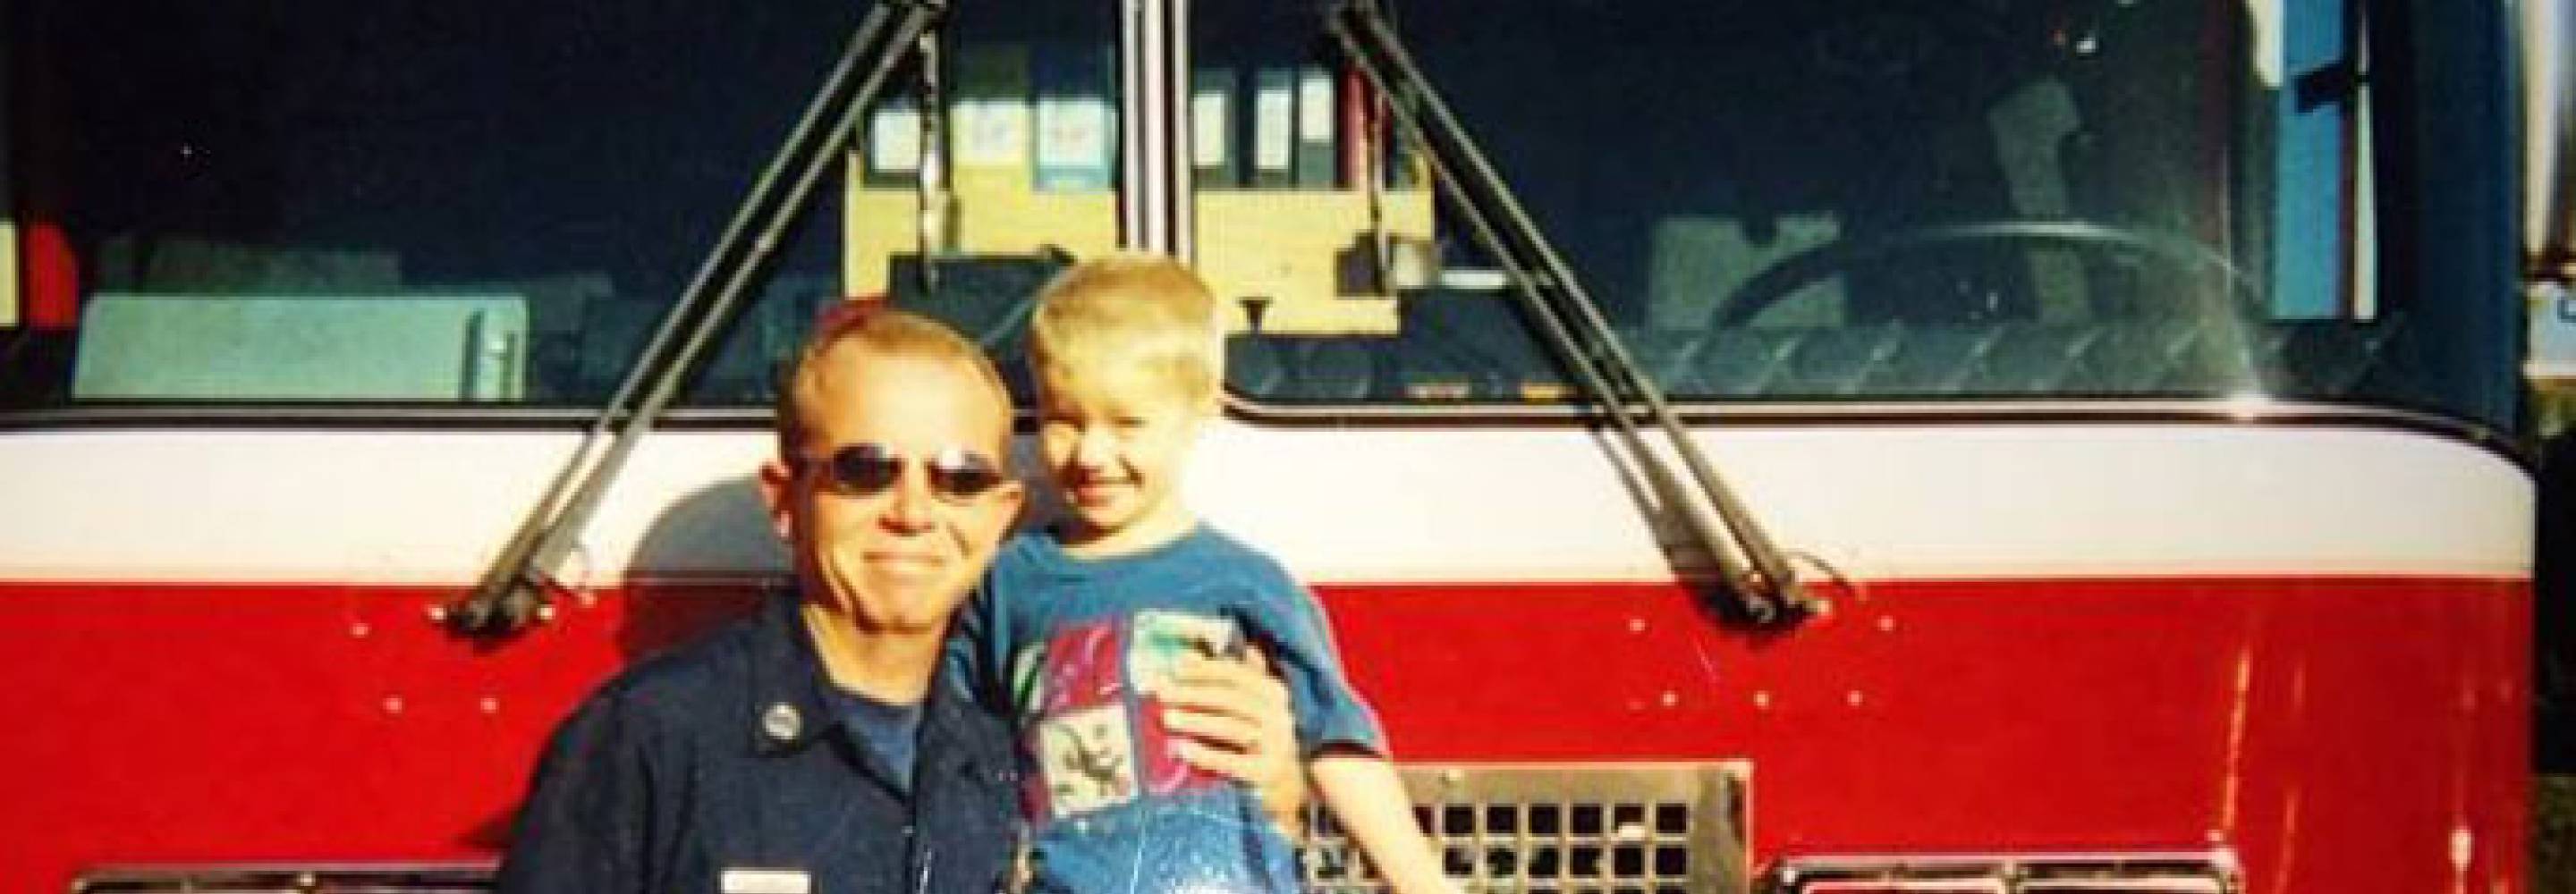 Kelly Richeson in front of fire truck with son